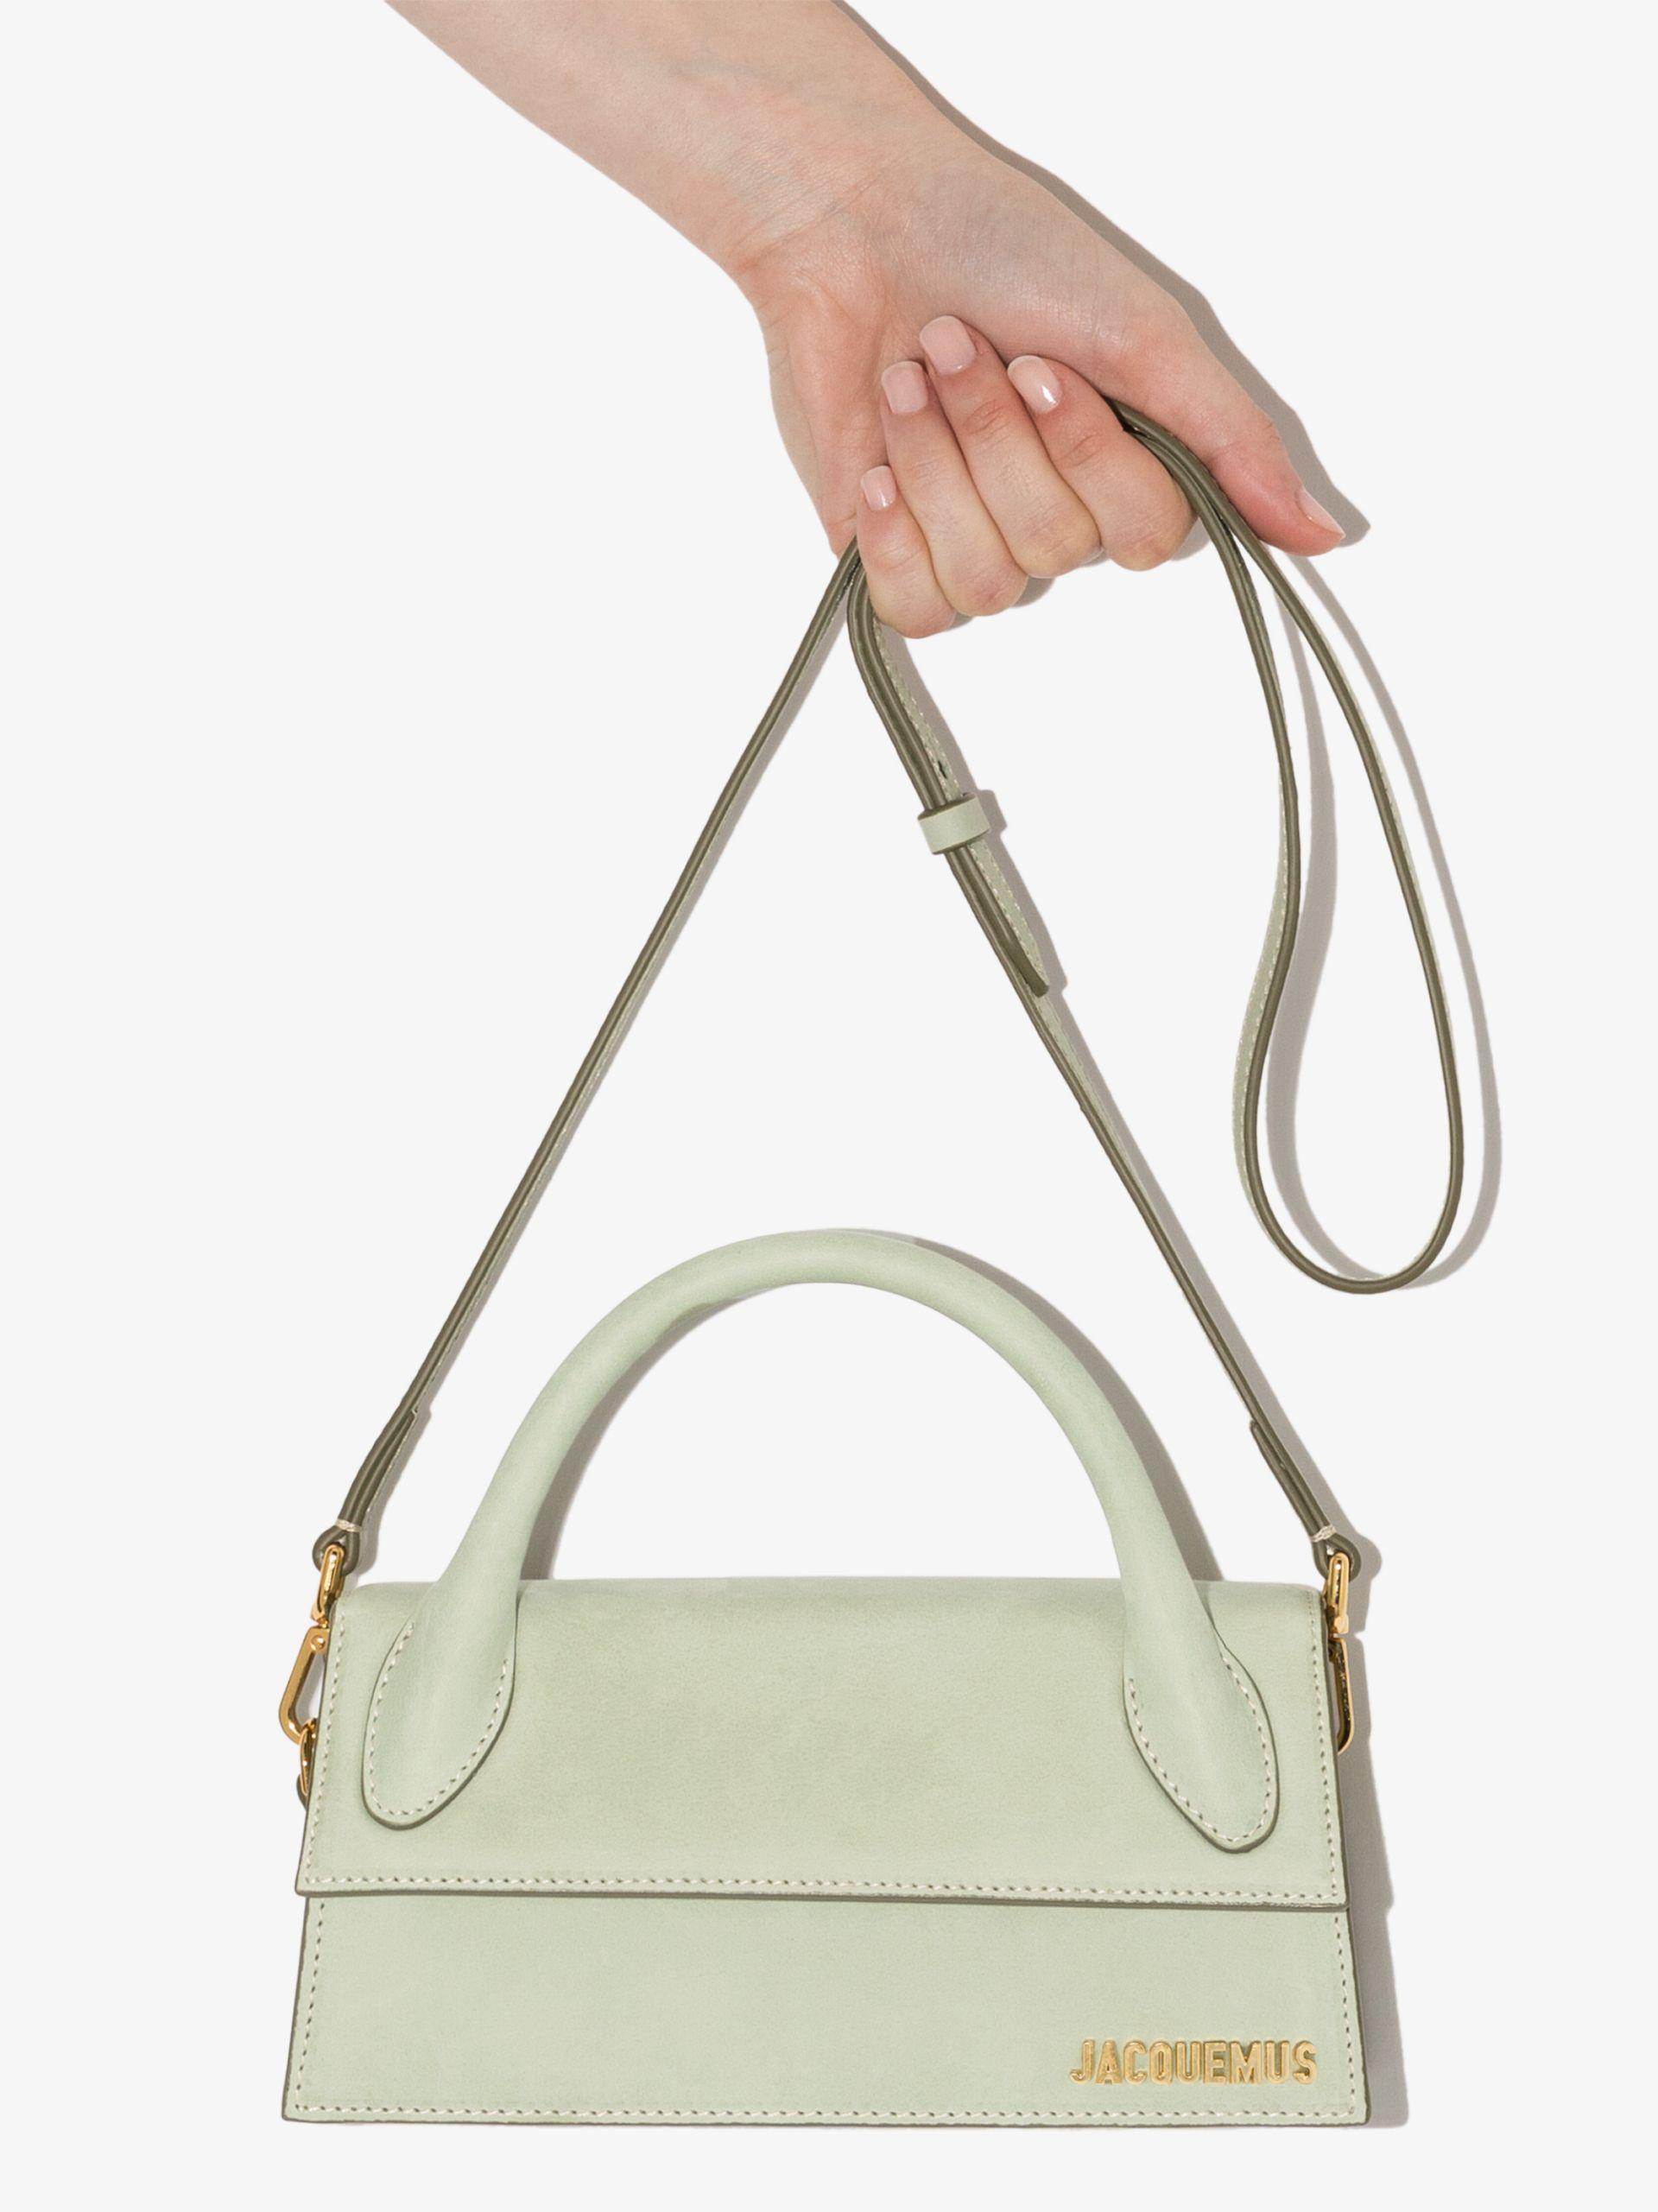 Jacquemus Le Chiquito Long Leather Shoulder Bag in Green | Lyst